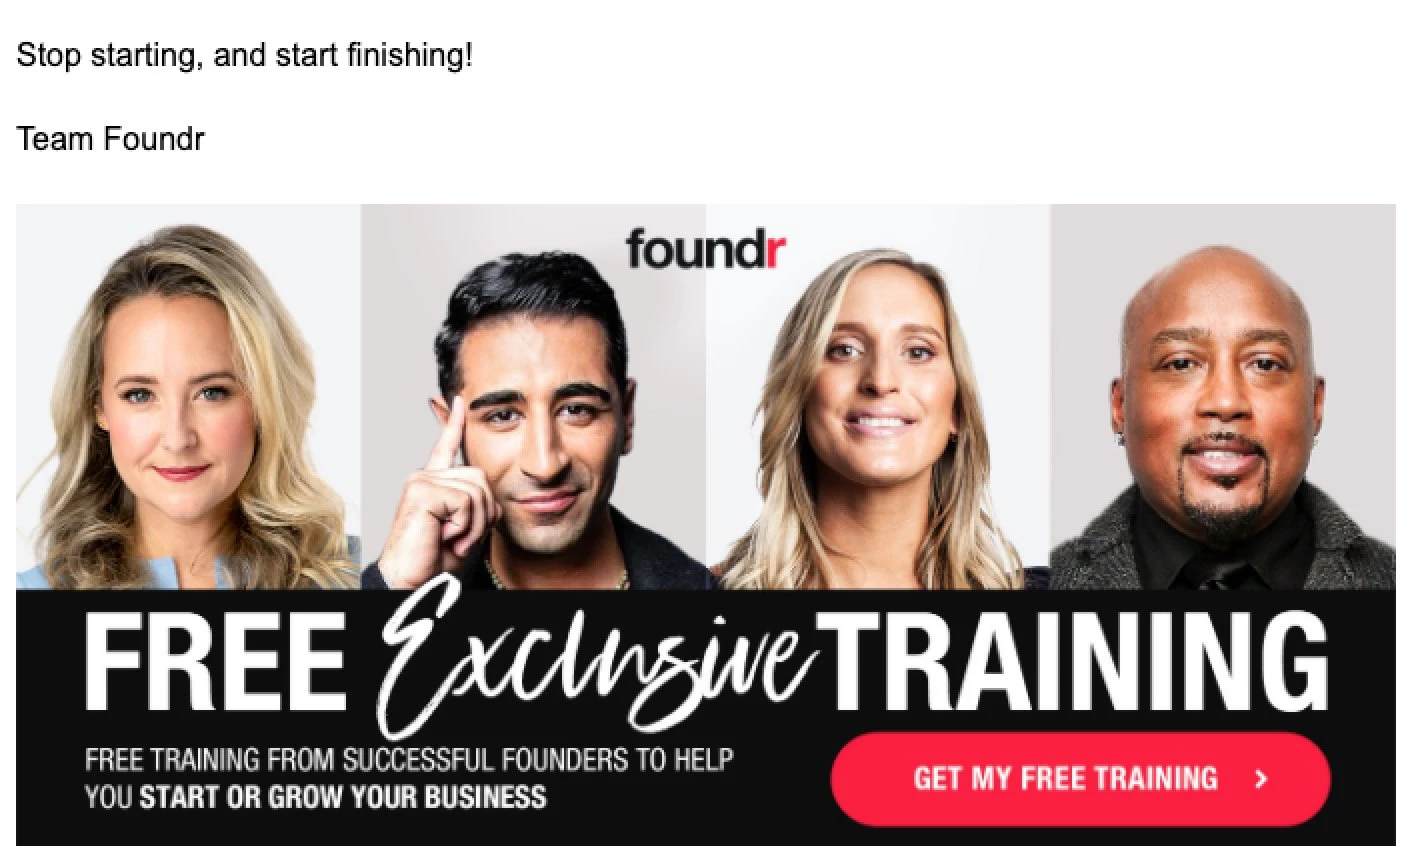 Foundr email sign-off example free exclusive training profile speakers